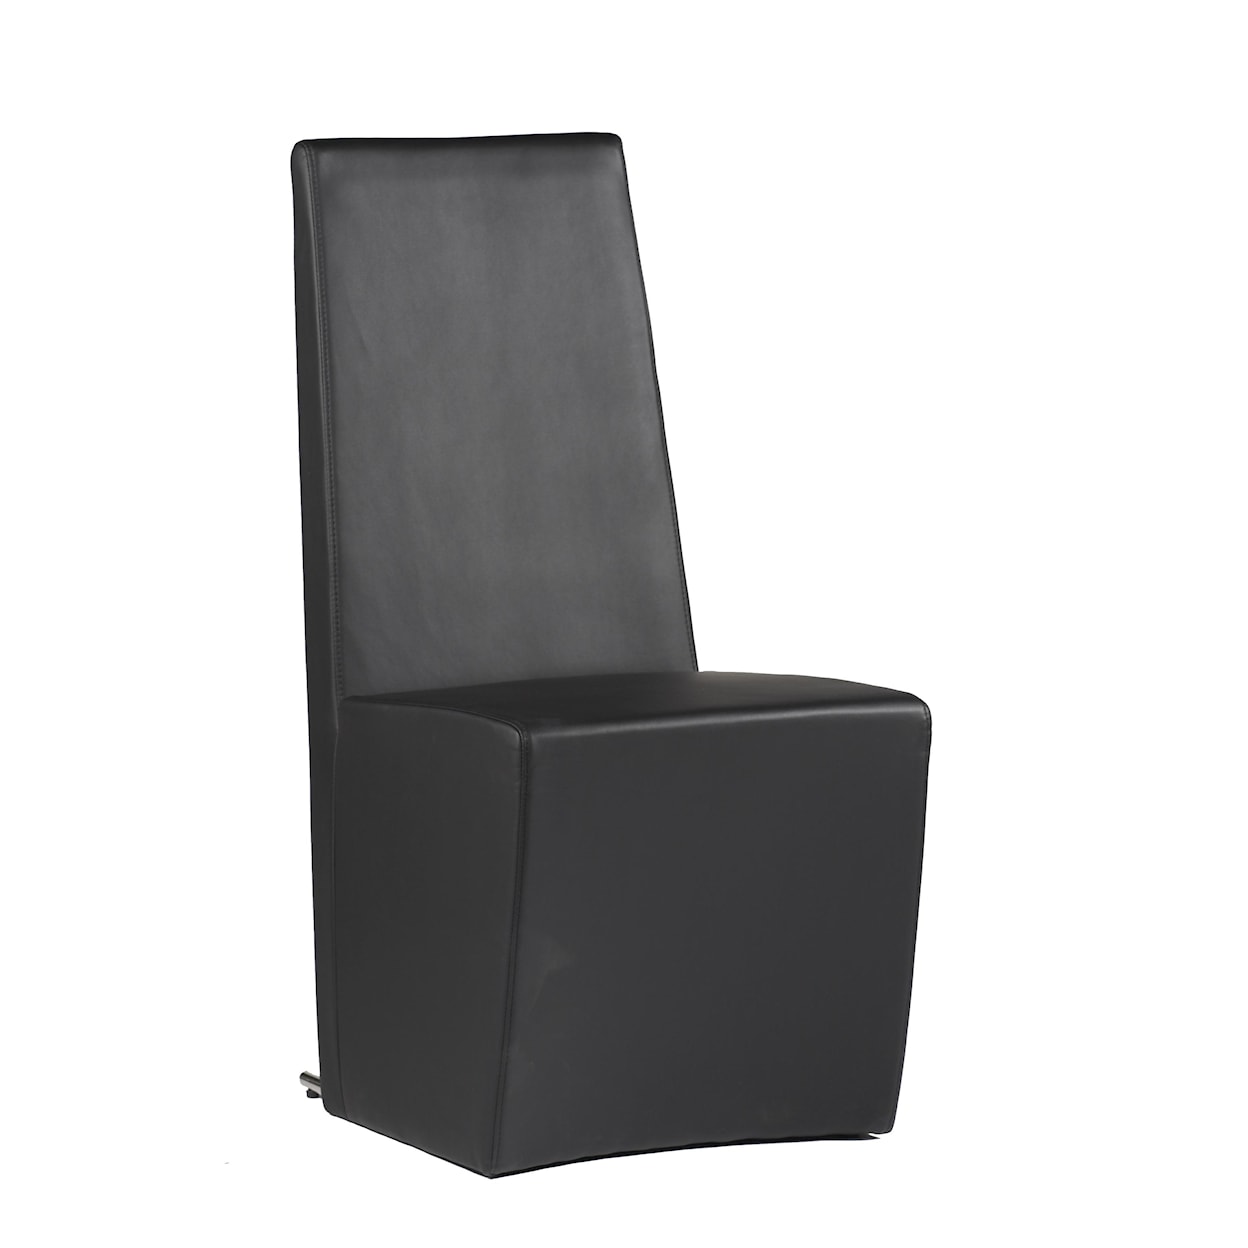 Chintaly Imports Cynthia Side Chair